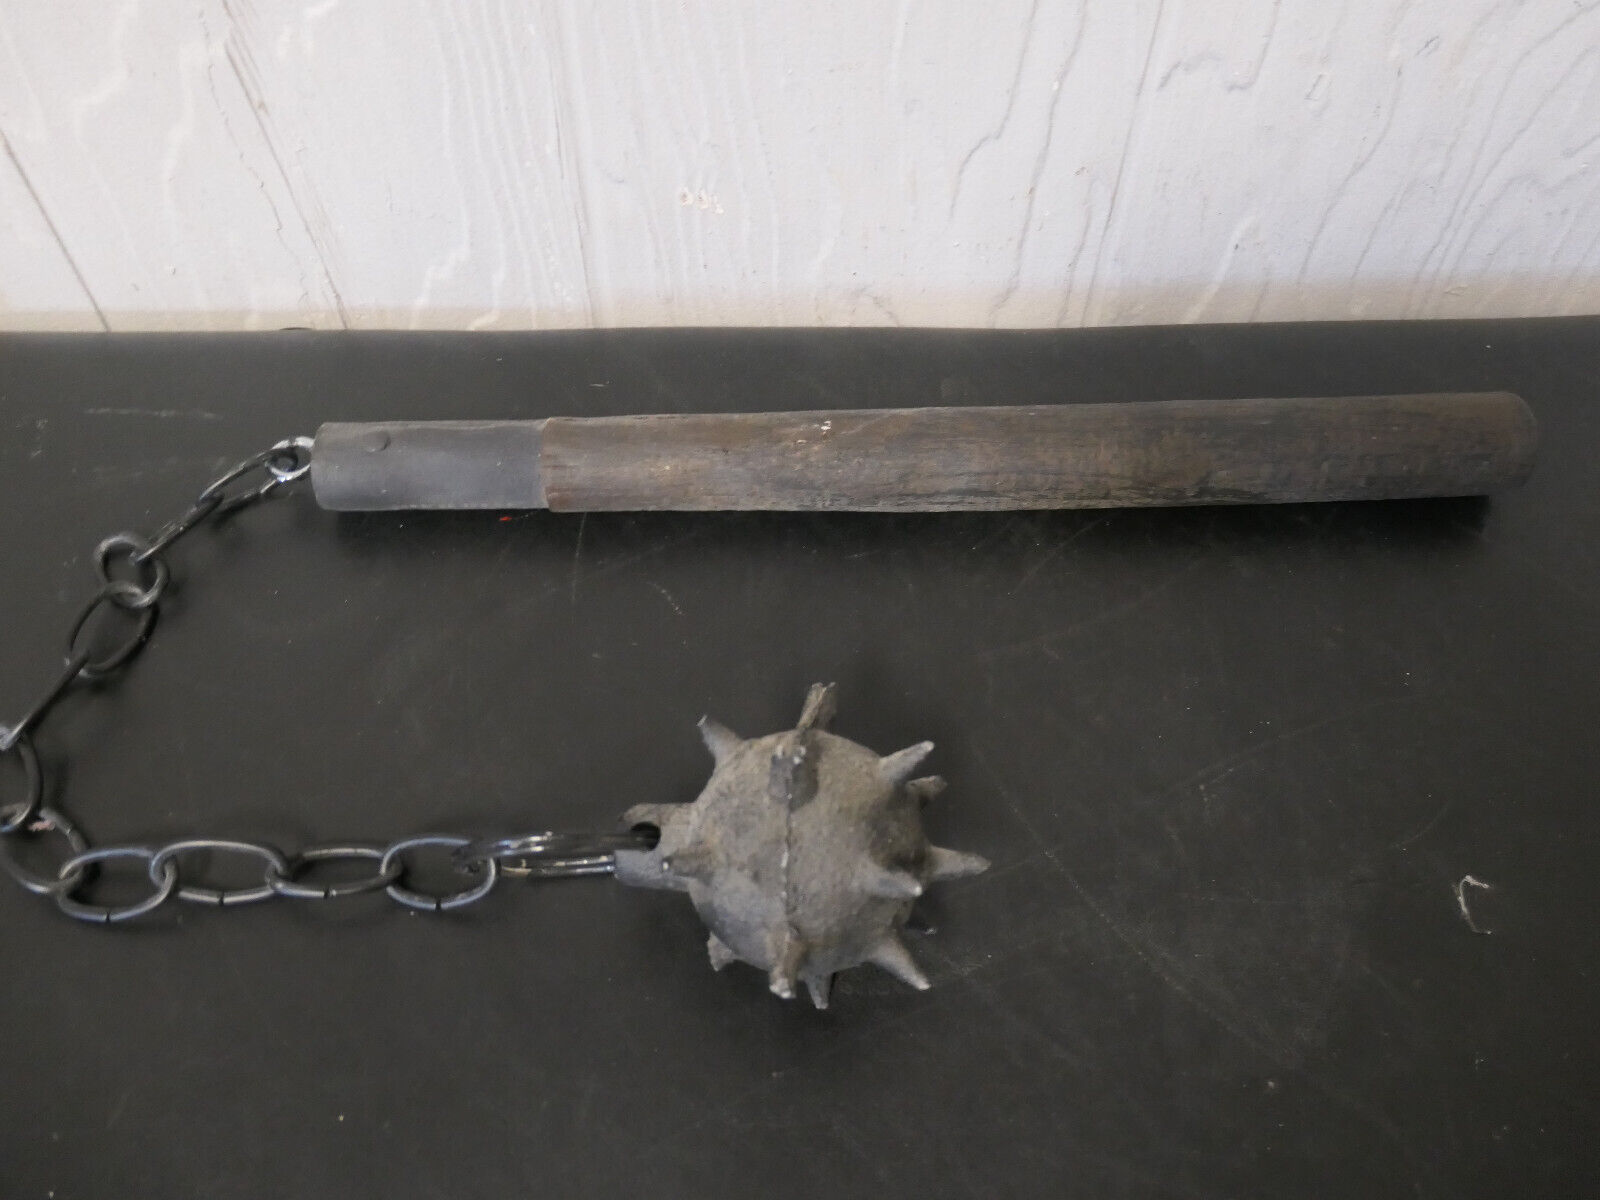 Antique Medieval Flail Morning Star Mace & Chain Pole Weapon Made In Spain #2